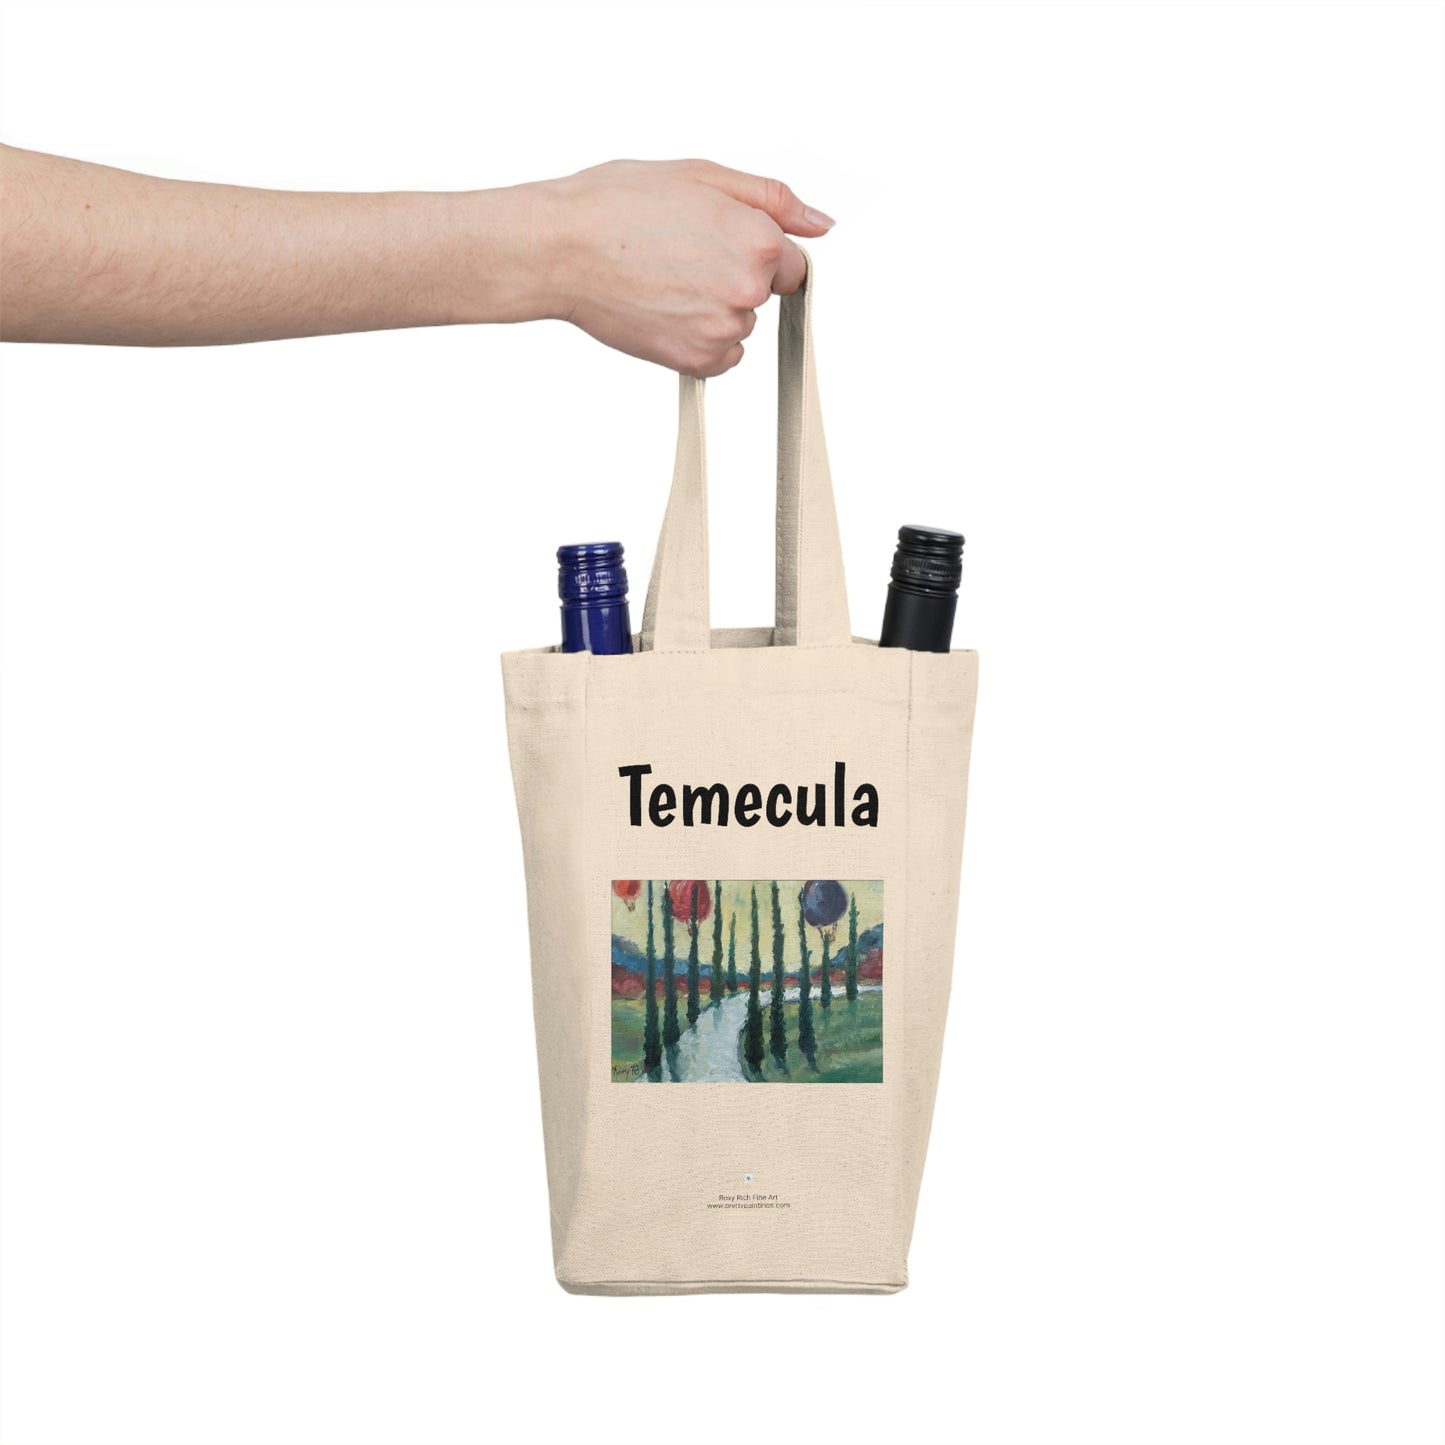 Temecula Double Wine Tote Bag featuring "Wine Country Balloons" painting